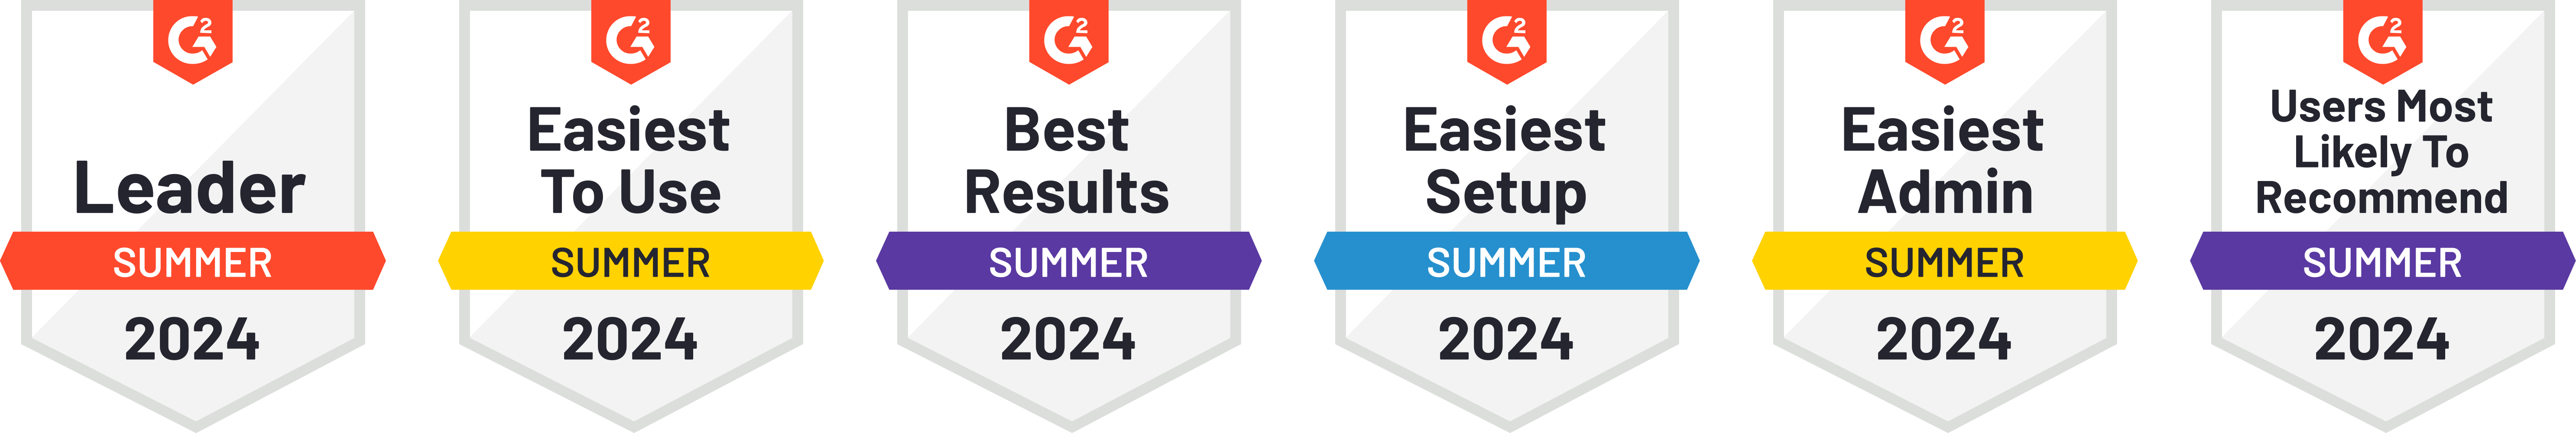 G2 Awards won by Wealthbox for Summer 2024.